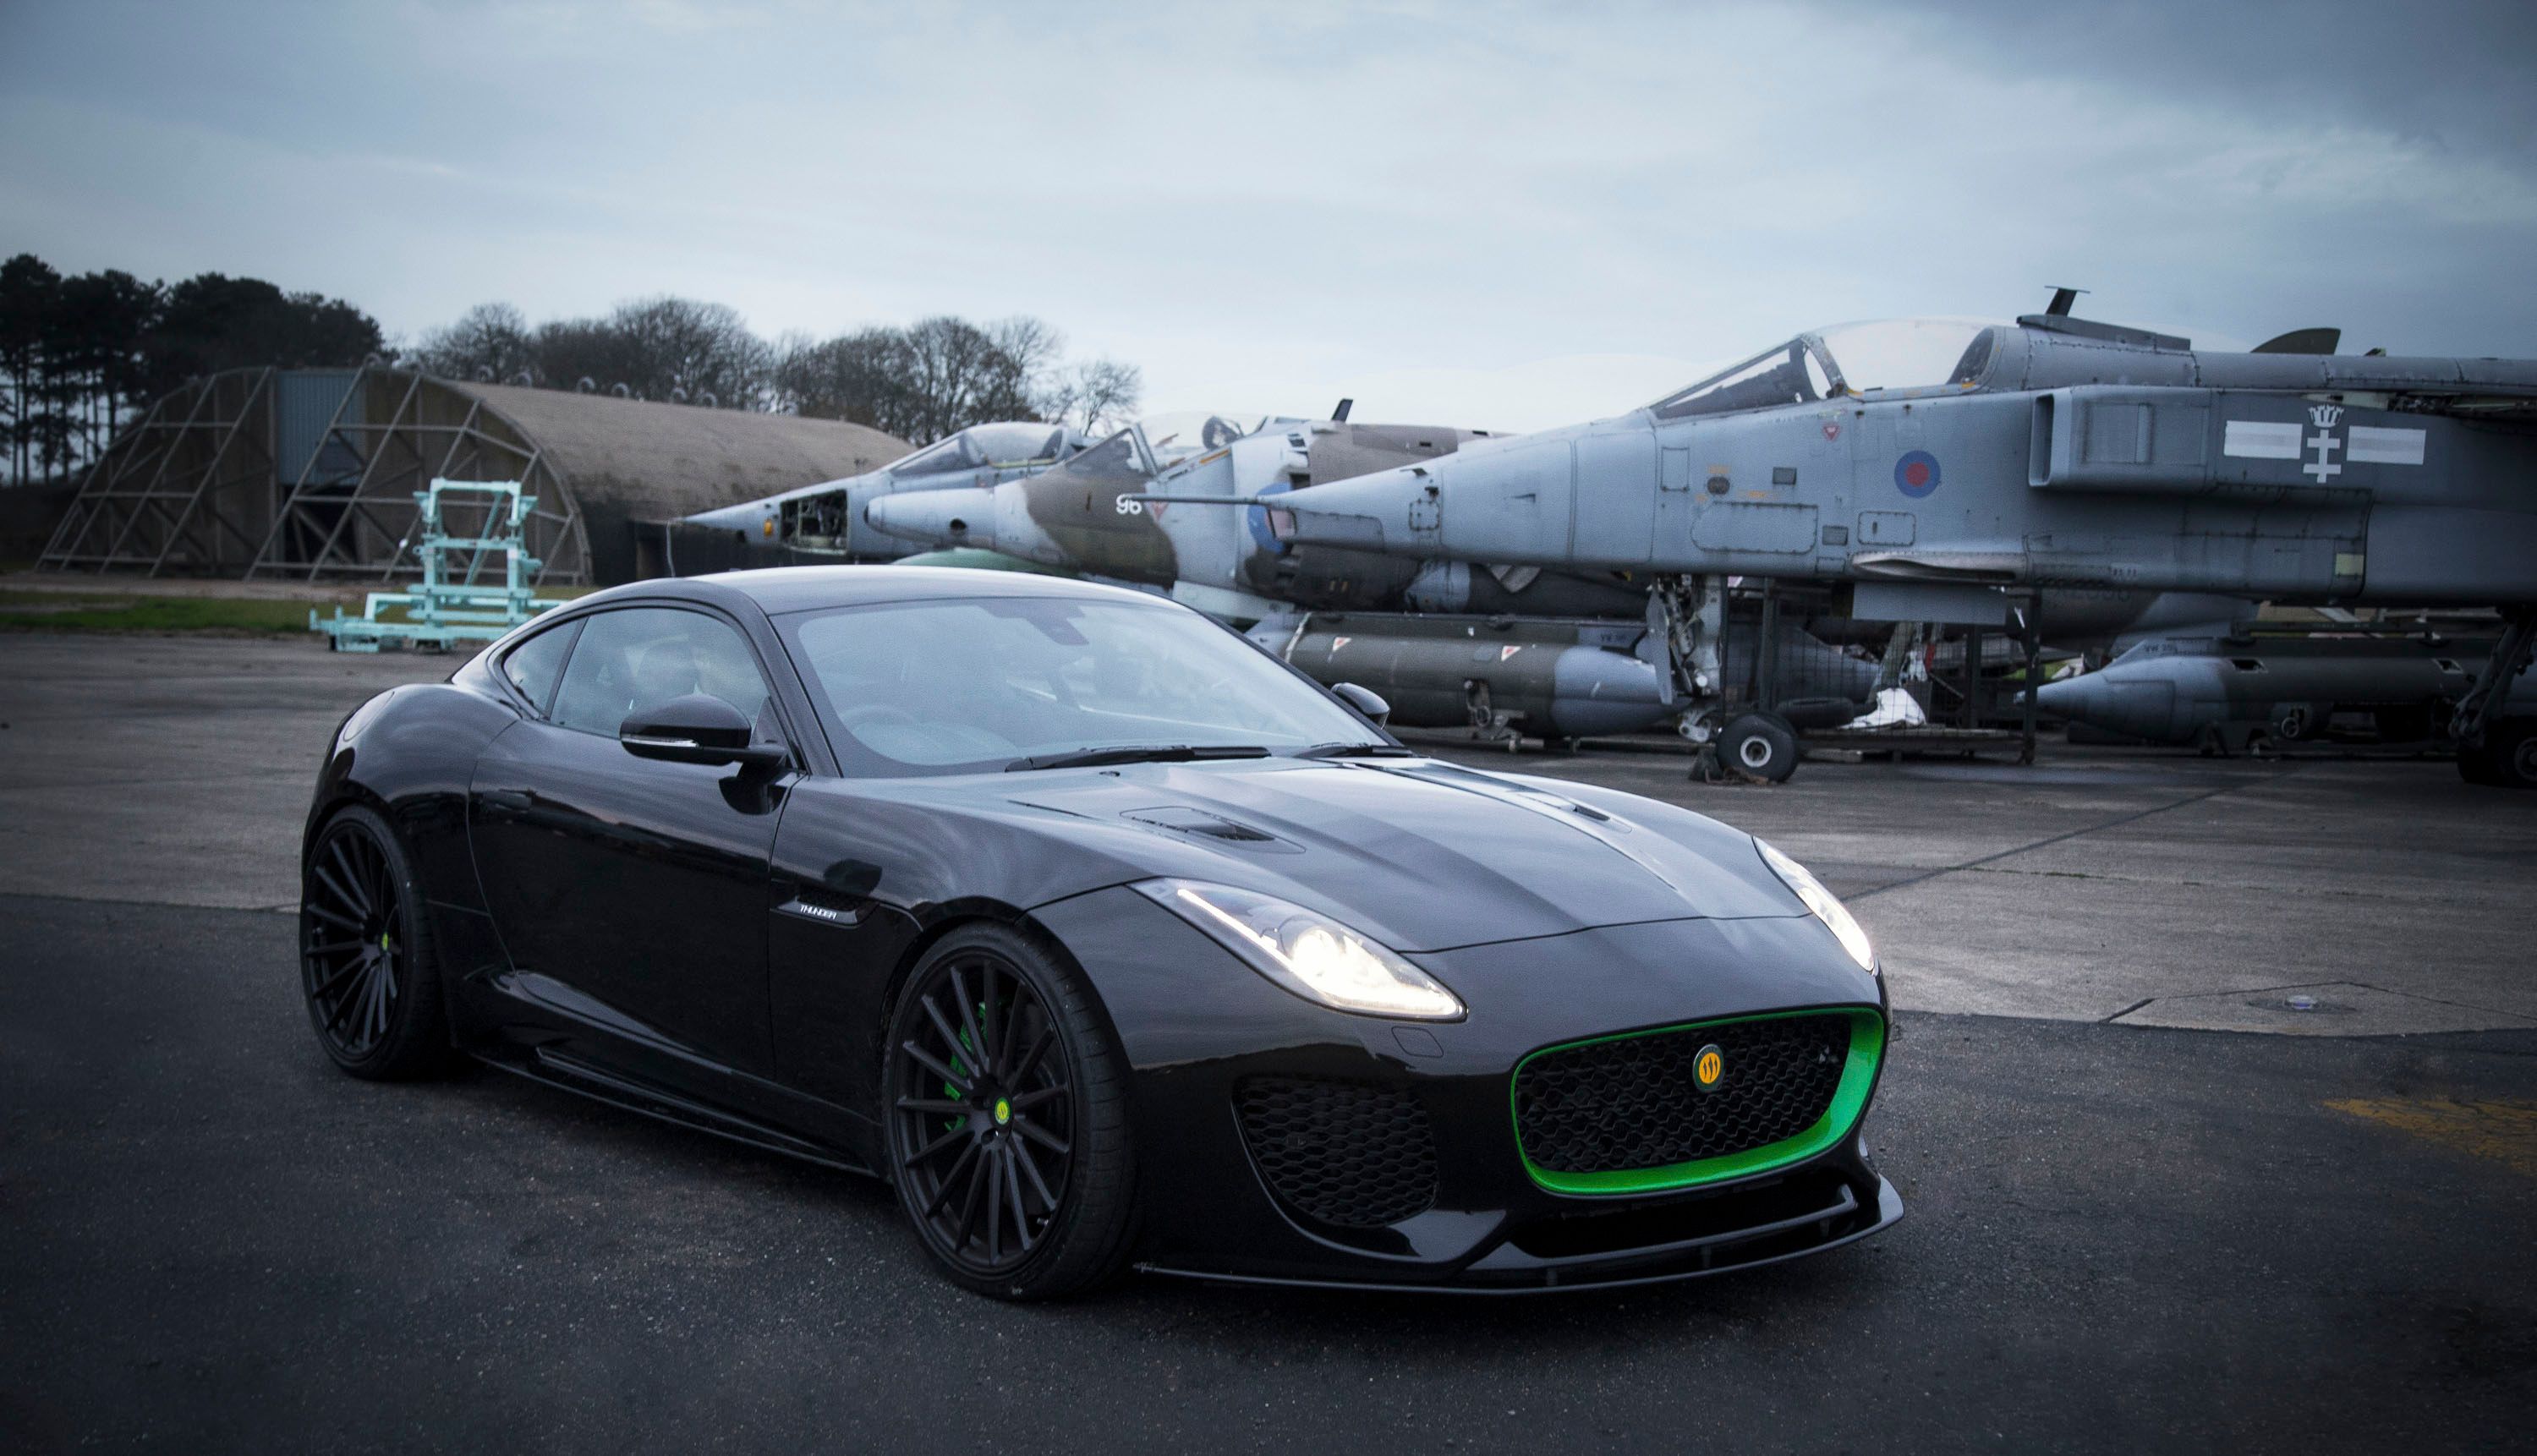 2019 The Lister Thunder Gets A Name Makeover, You Can Now Start Calling it The LFT-666